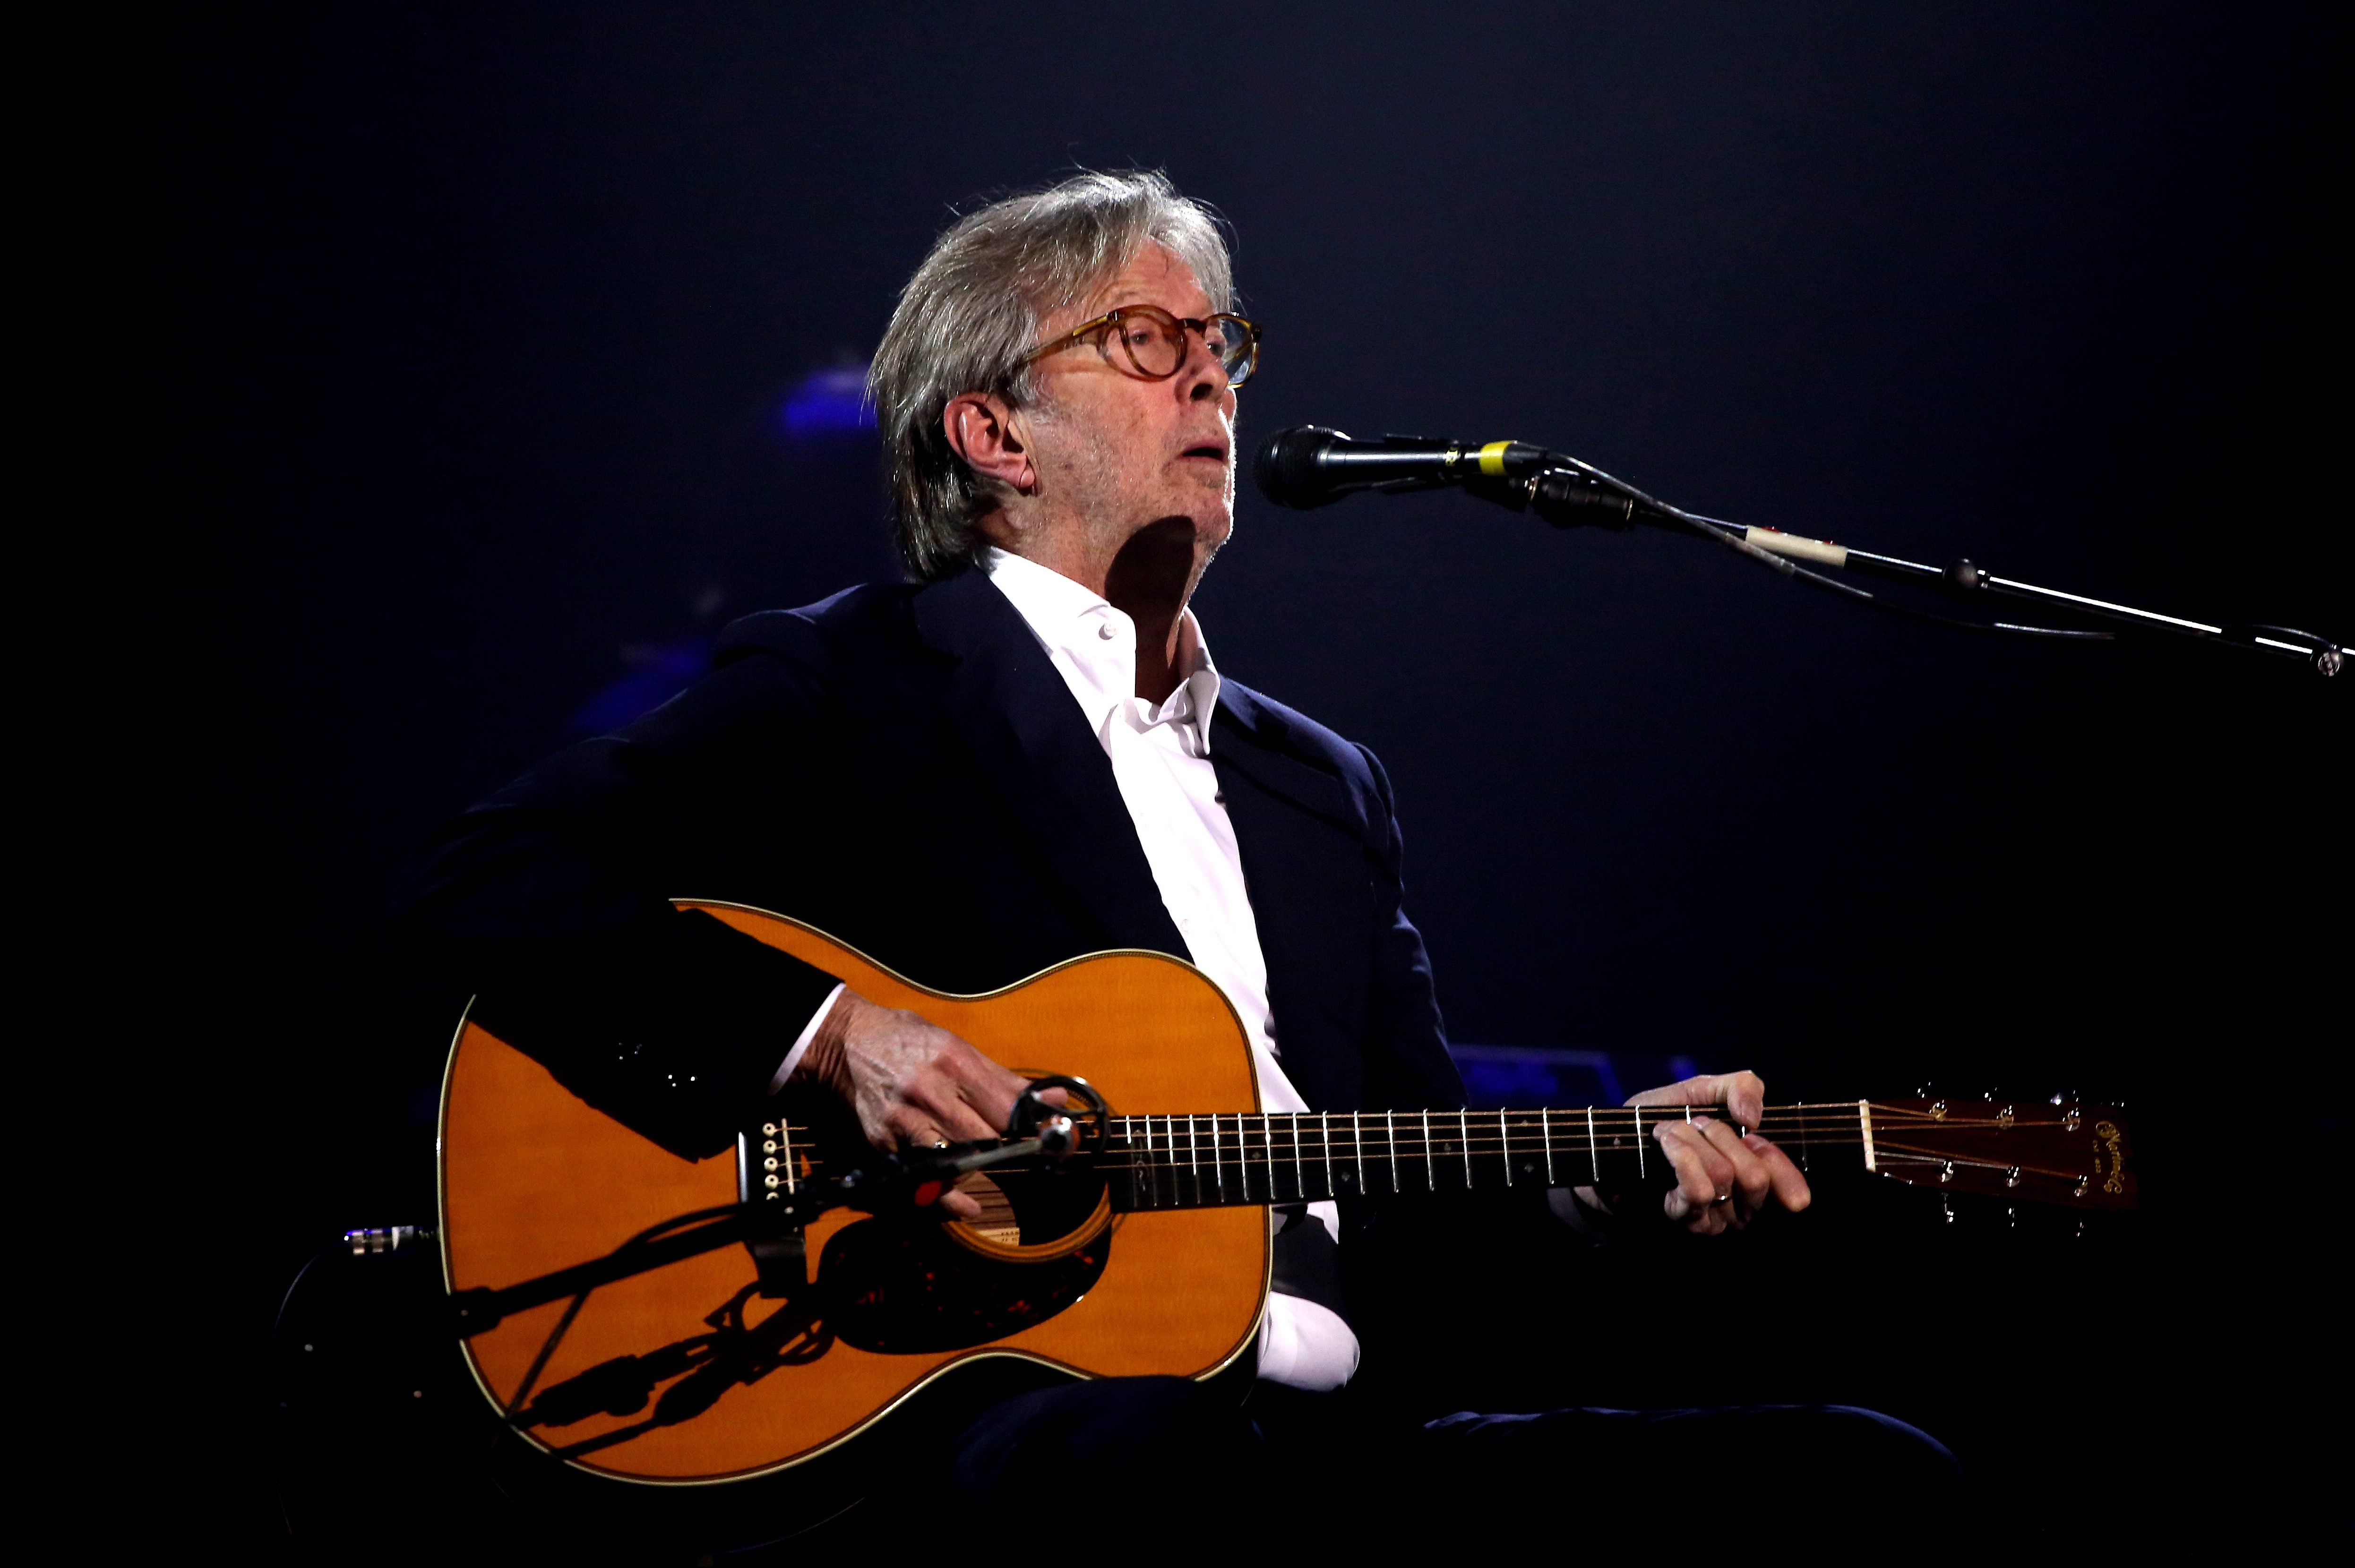 Eric Clapton on stage during The Fashion Awards 2019 held at Royal Albert Hall on December 02, 2019 in London, England.